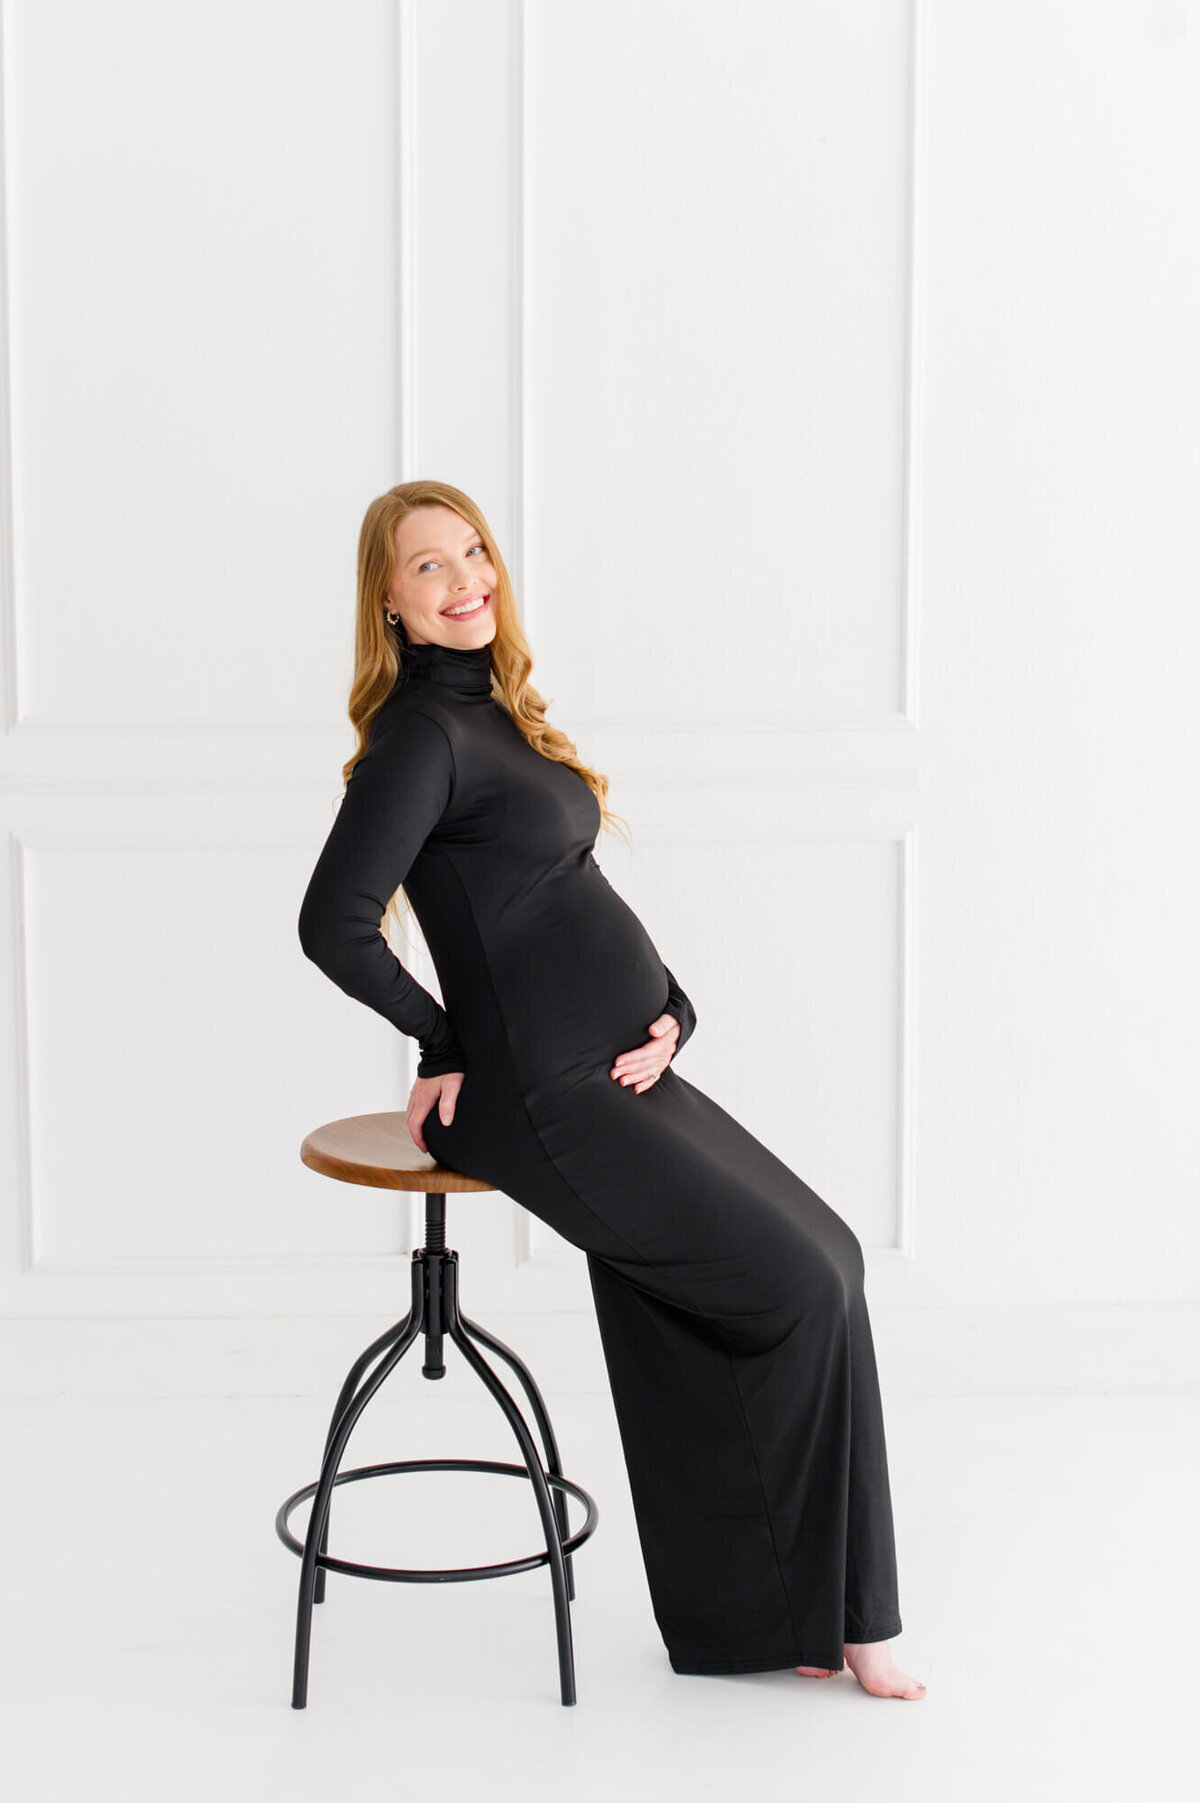 Orlando Maternity photographer captures pregnant mom sitting on a stool with her hand on her belly